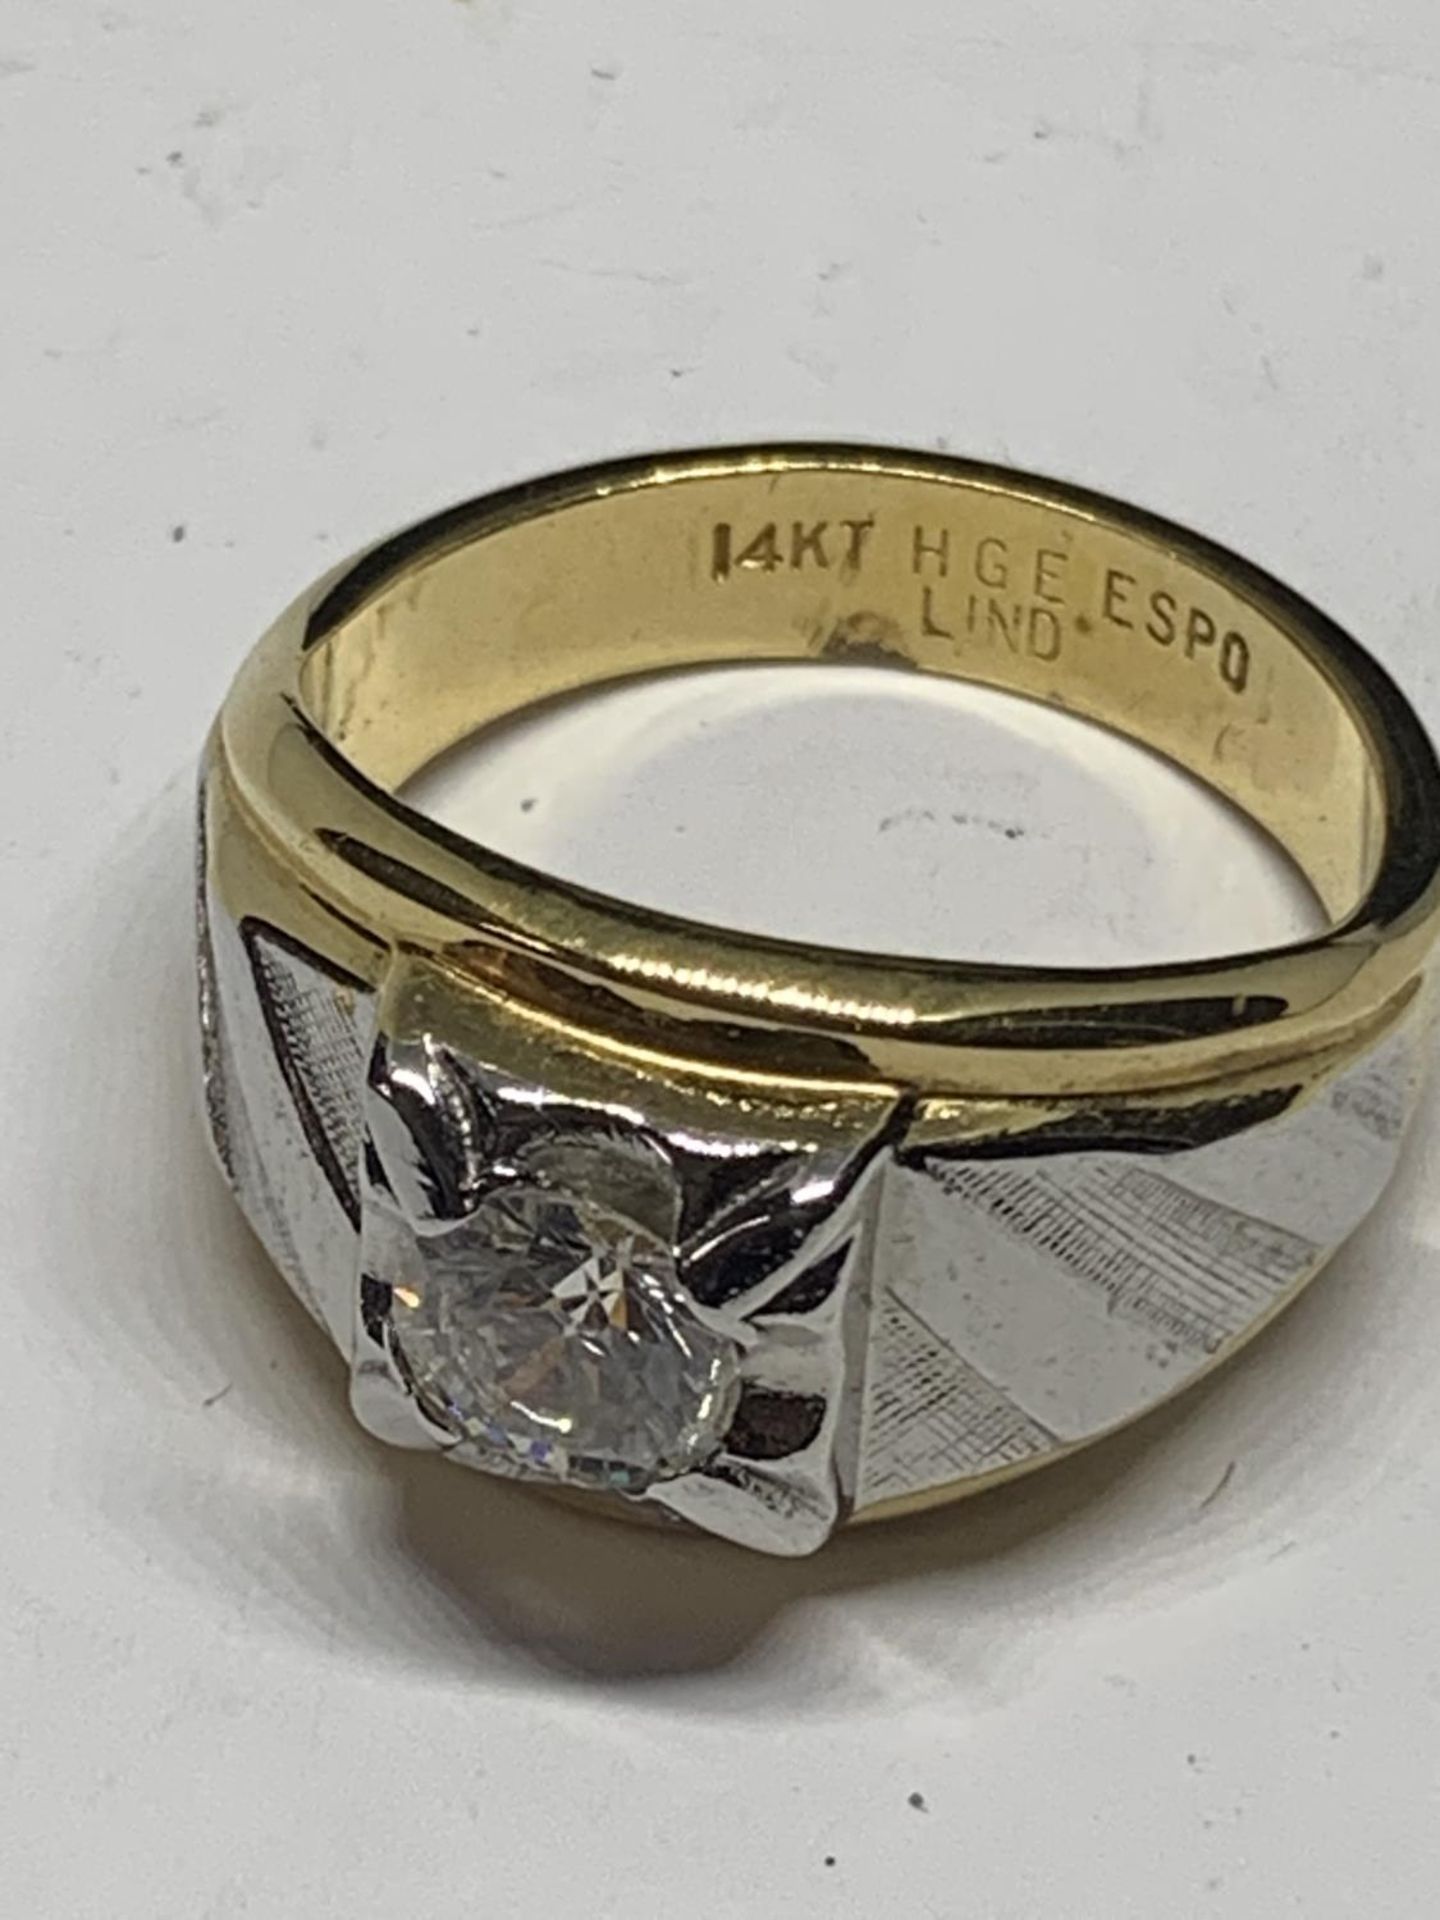 A GENTS RING WITH A CLEAR STONE IN A PRESENTATION BOX